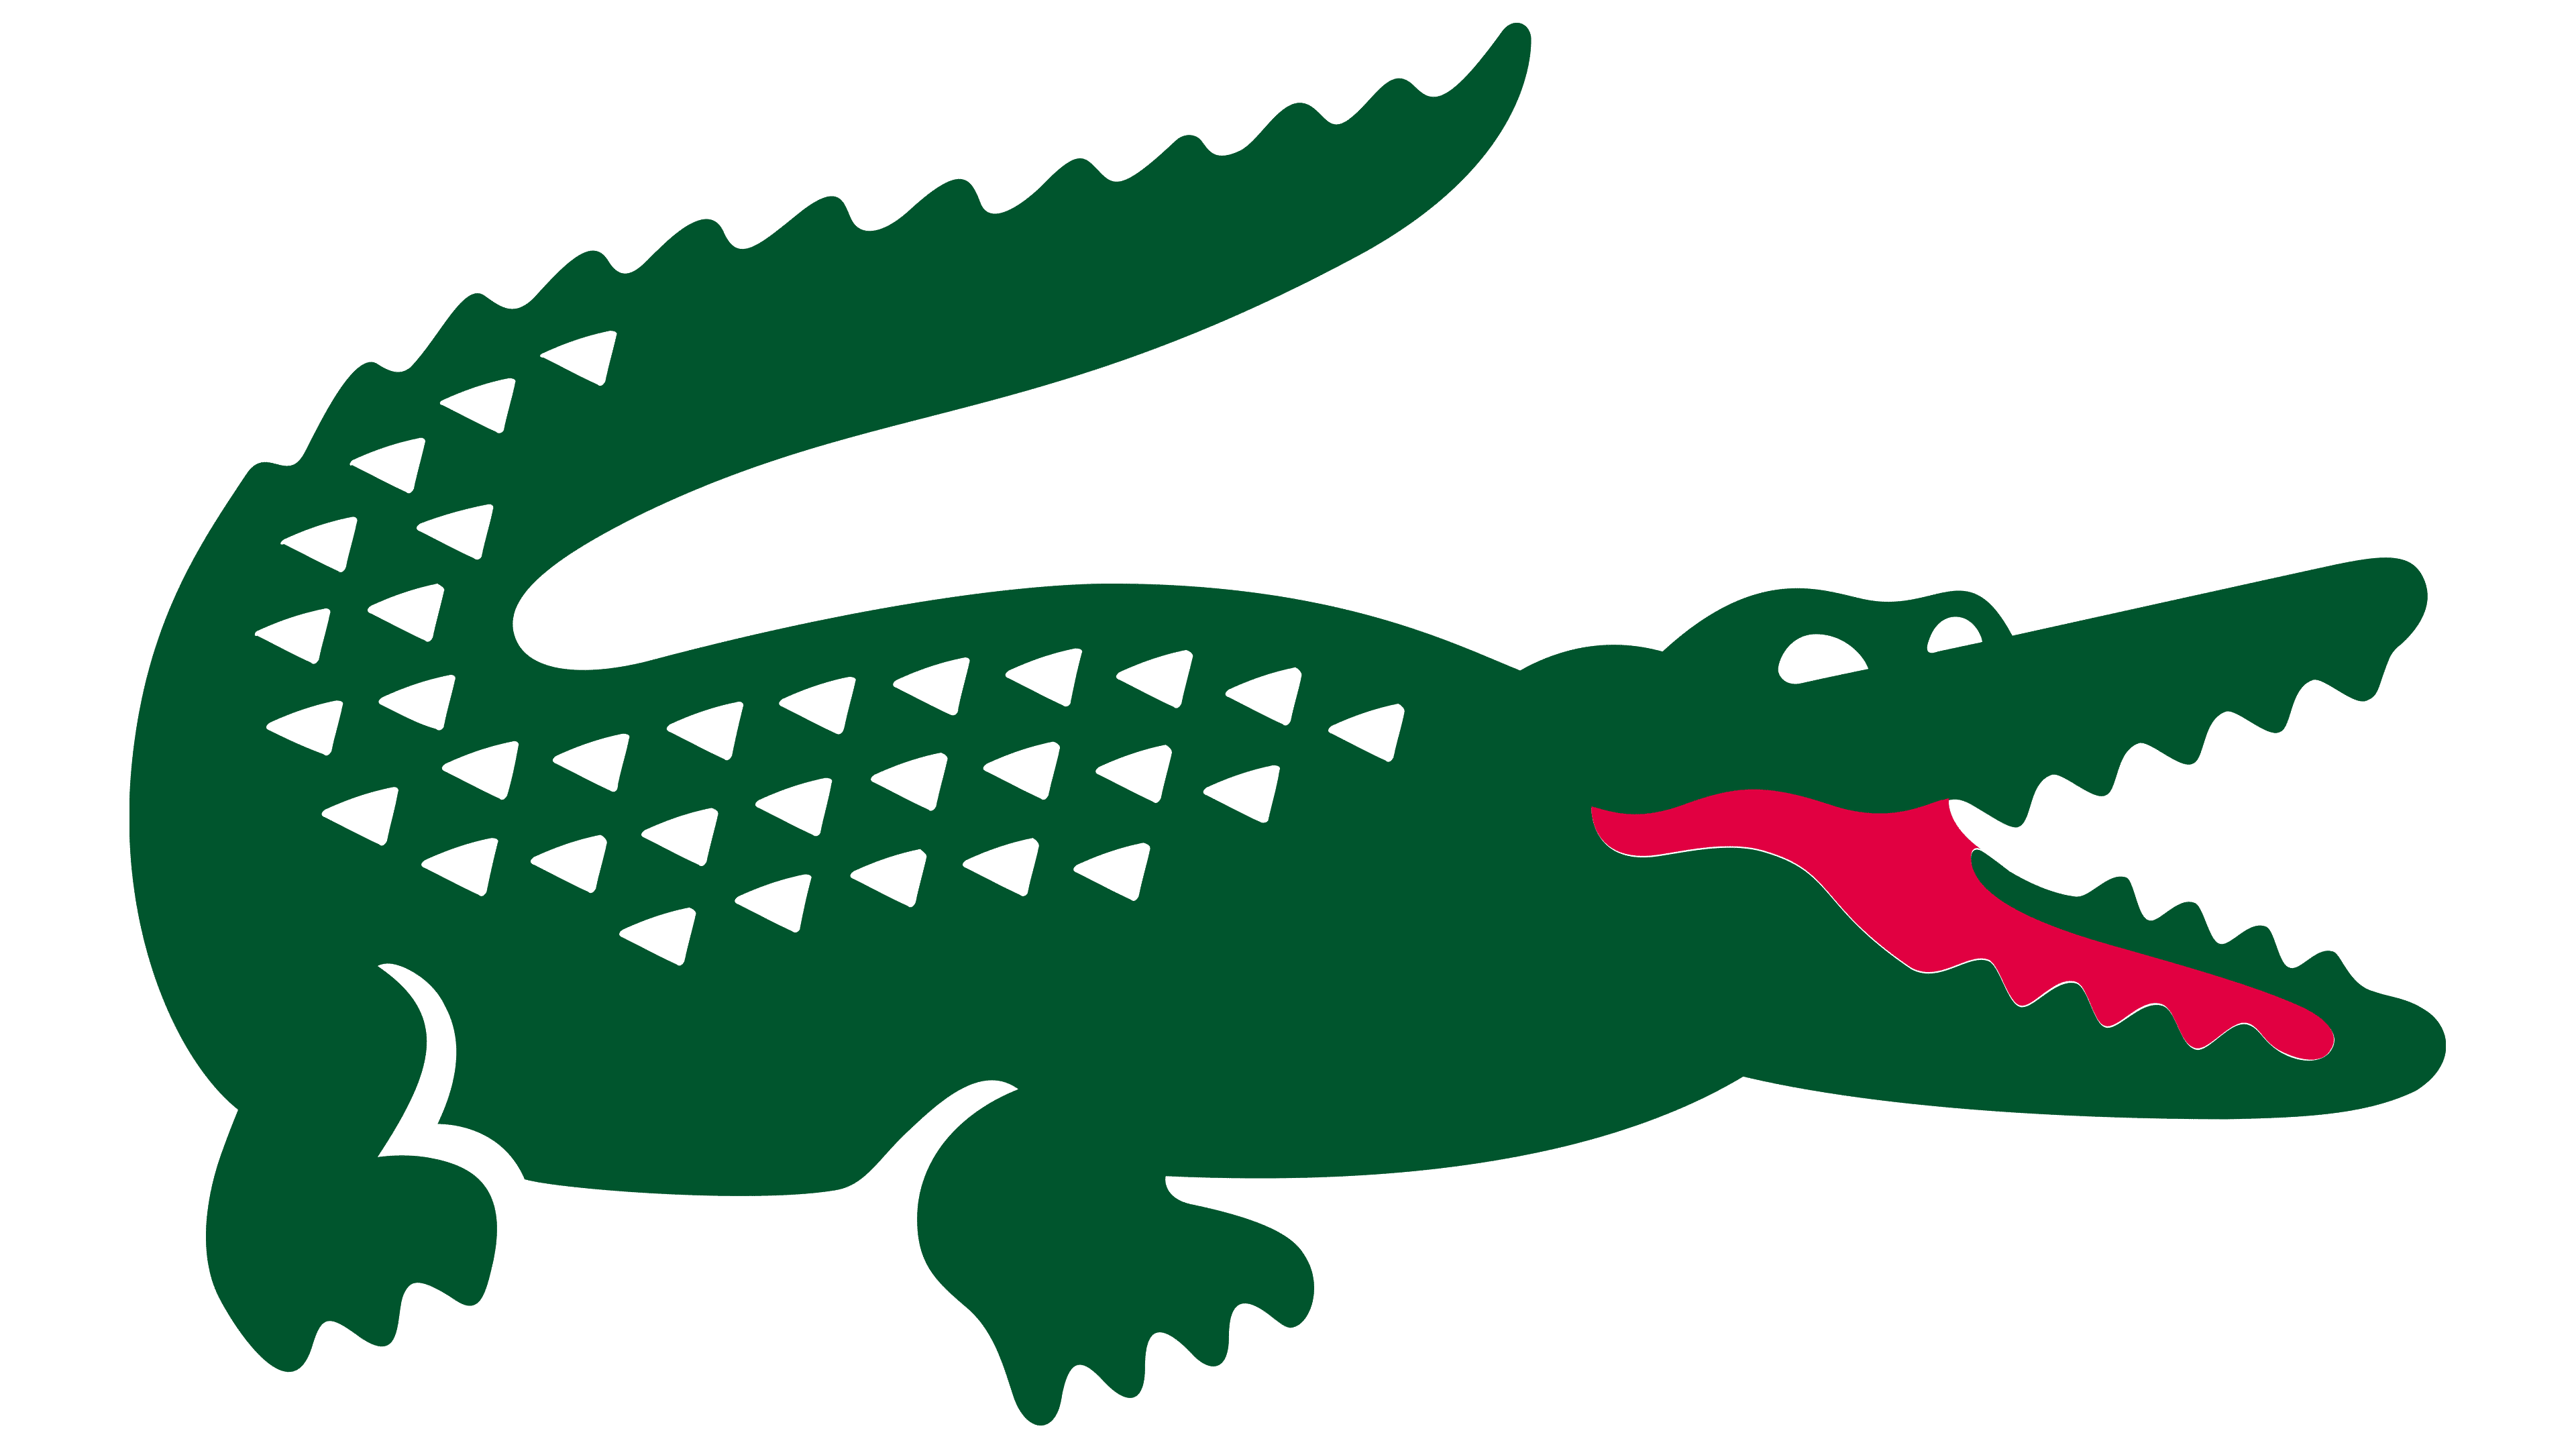 Lacoste symbol, meaning, history, PNG,